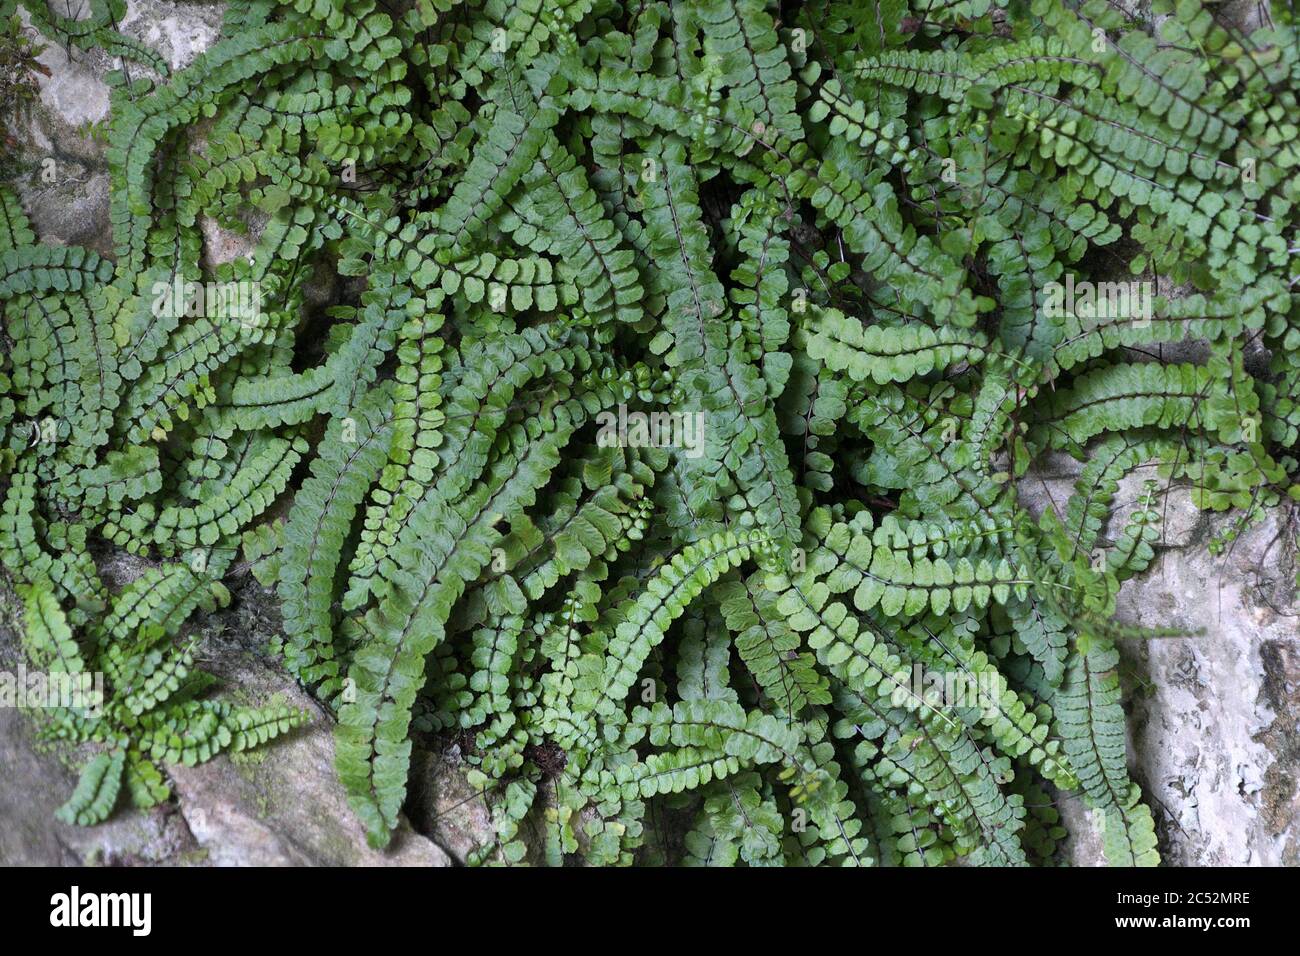 Maidenhair spleenwort (fern) growing on limestone in the Yorkshire Dales National Park, North Yorkshire, England Stock Photo